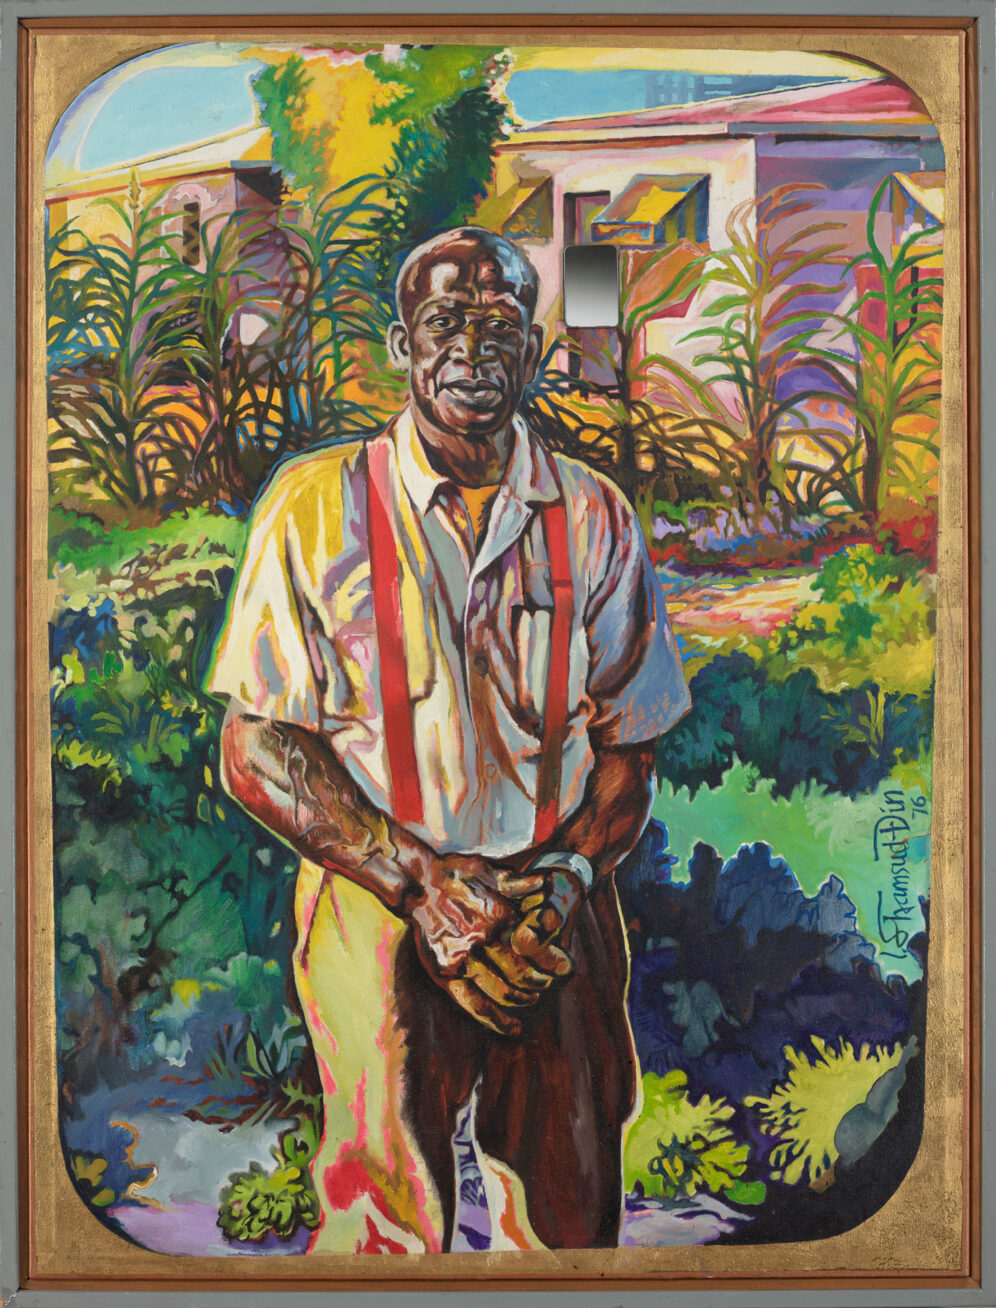 Painting of an older black man in overalls and a short-sleeved white button down shirt with his hands clasped in front of him. Behind him are plants and a garden and a pink building behind the garden.